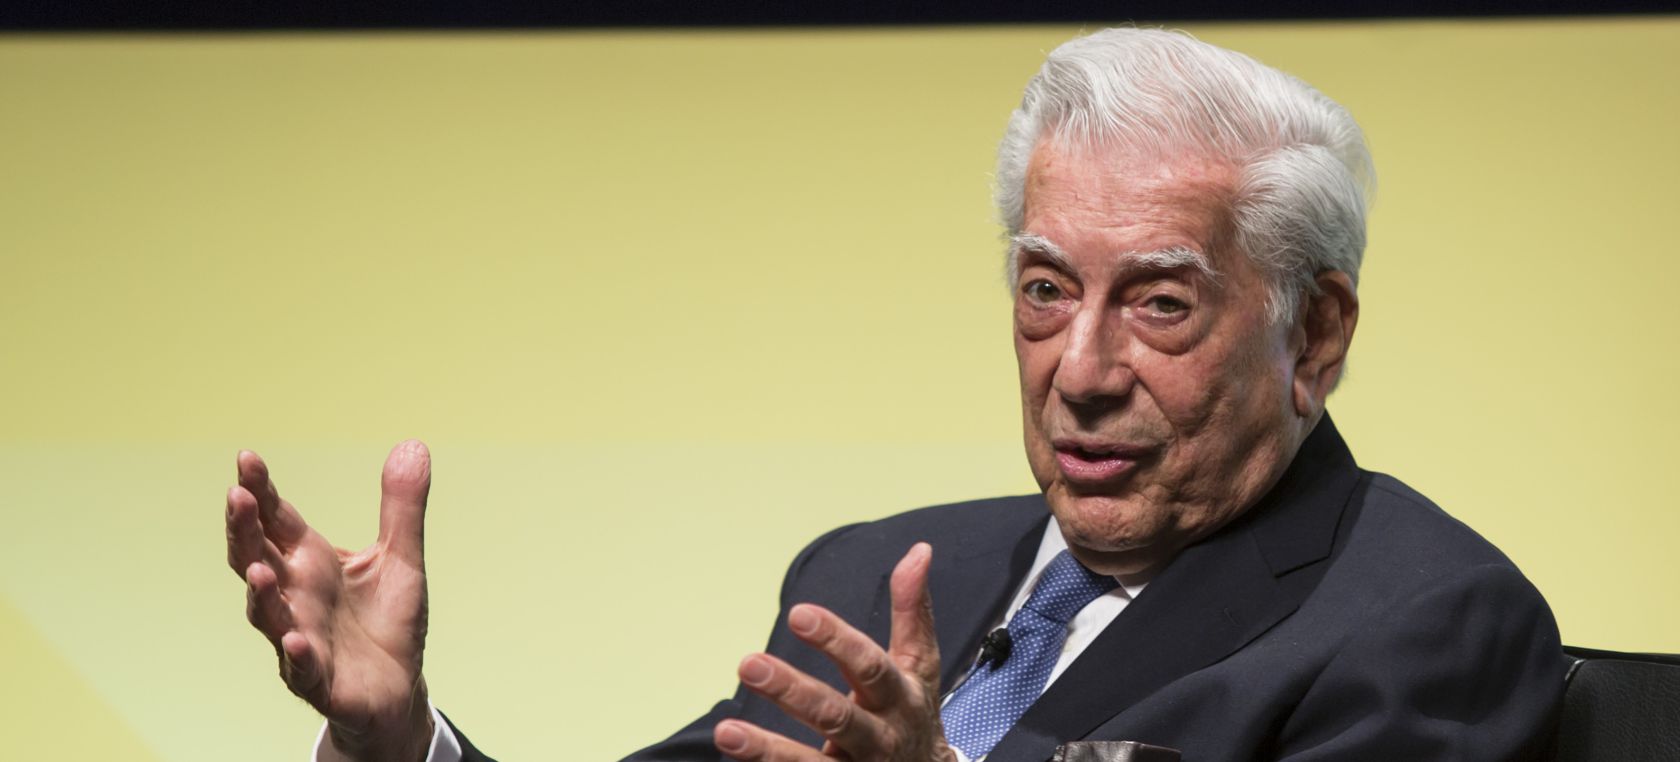 Vargas Llosa made some controversial statements at the Buenos Aires Book Fair. Photo: Getty Images